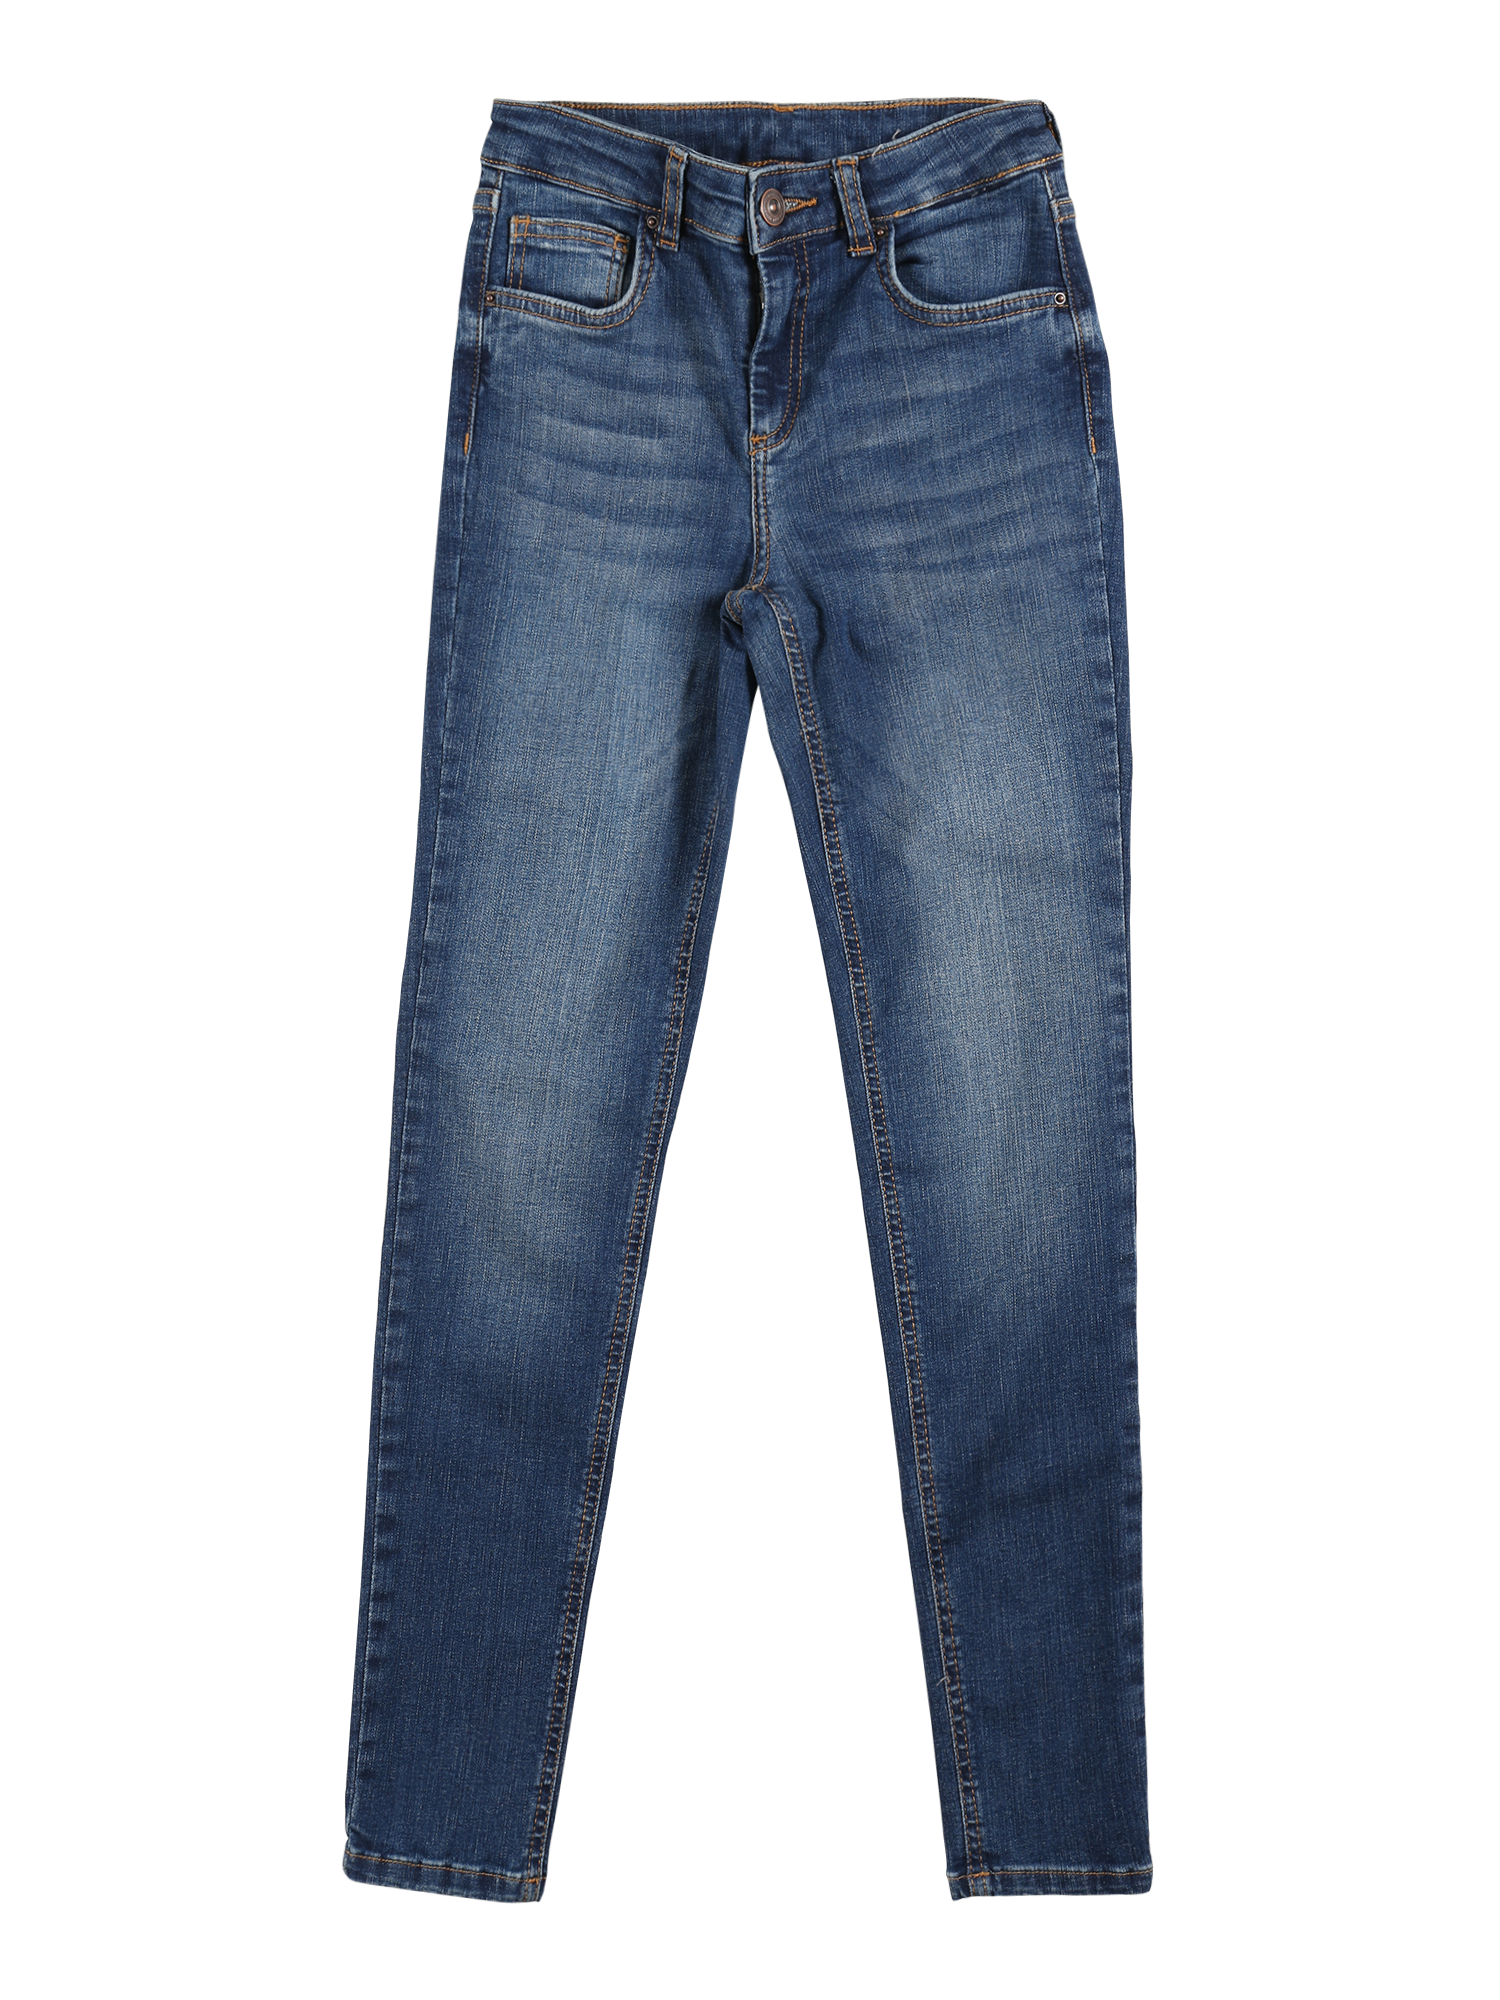 Bambini Ul55L Little Pieces Jeans in Blu Scuro 